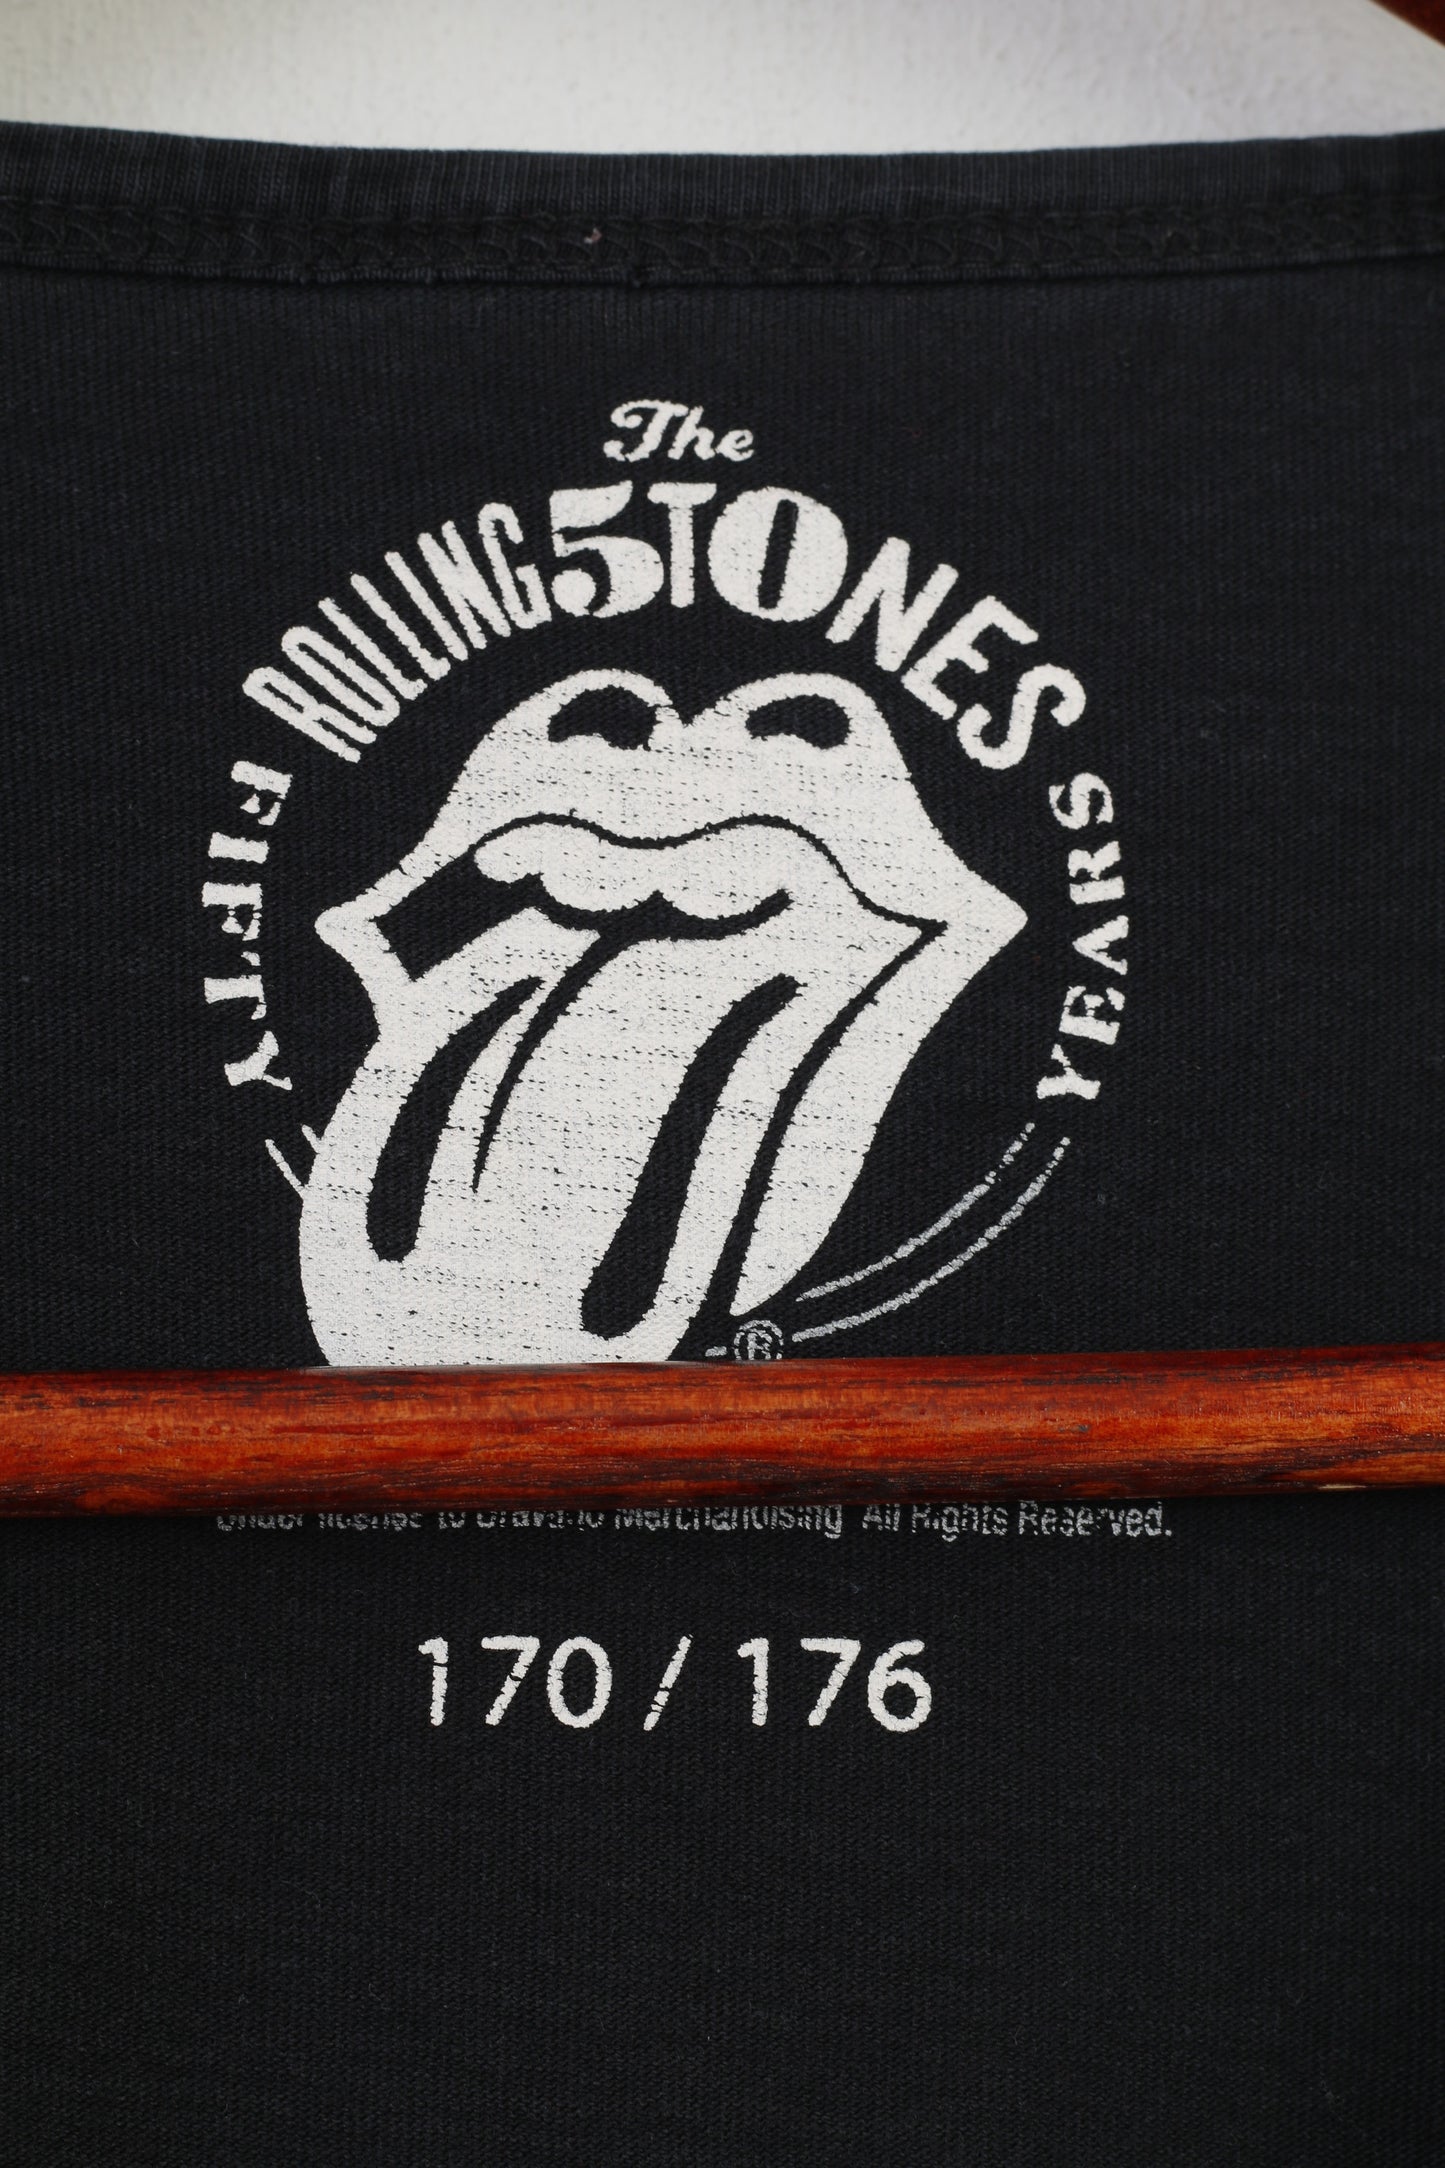 The Rolling Stones Women 170 S Shirt Black Mouth Graphic Cotton Fit Vintage Fif'ty Years Top